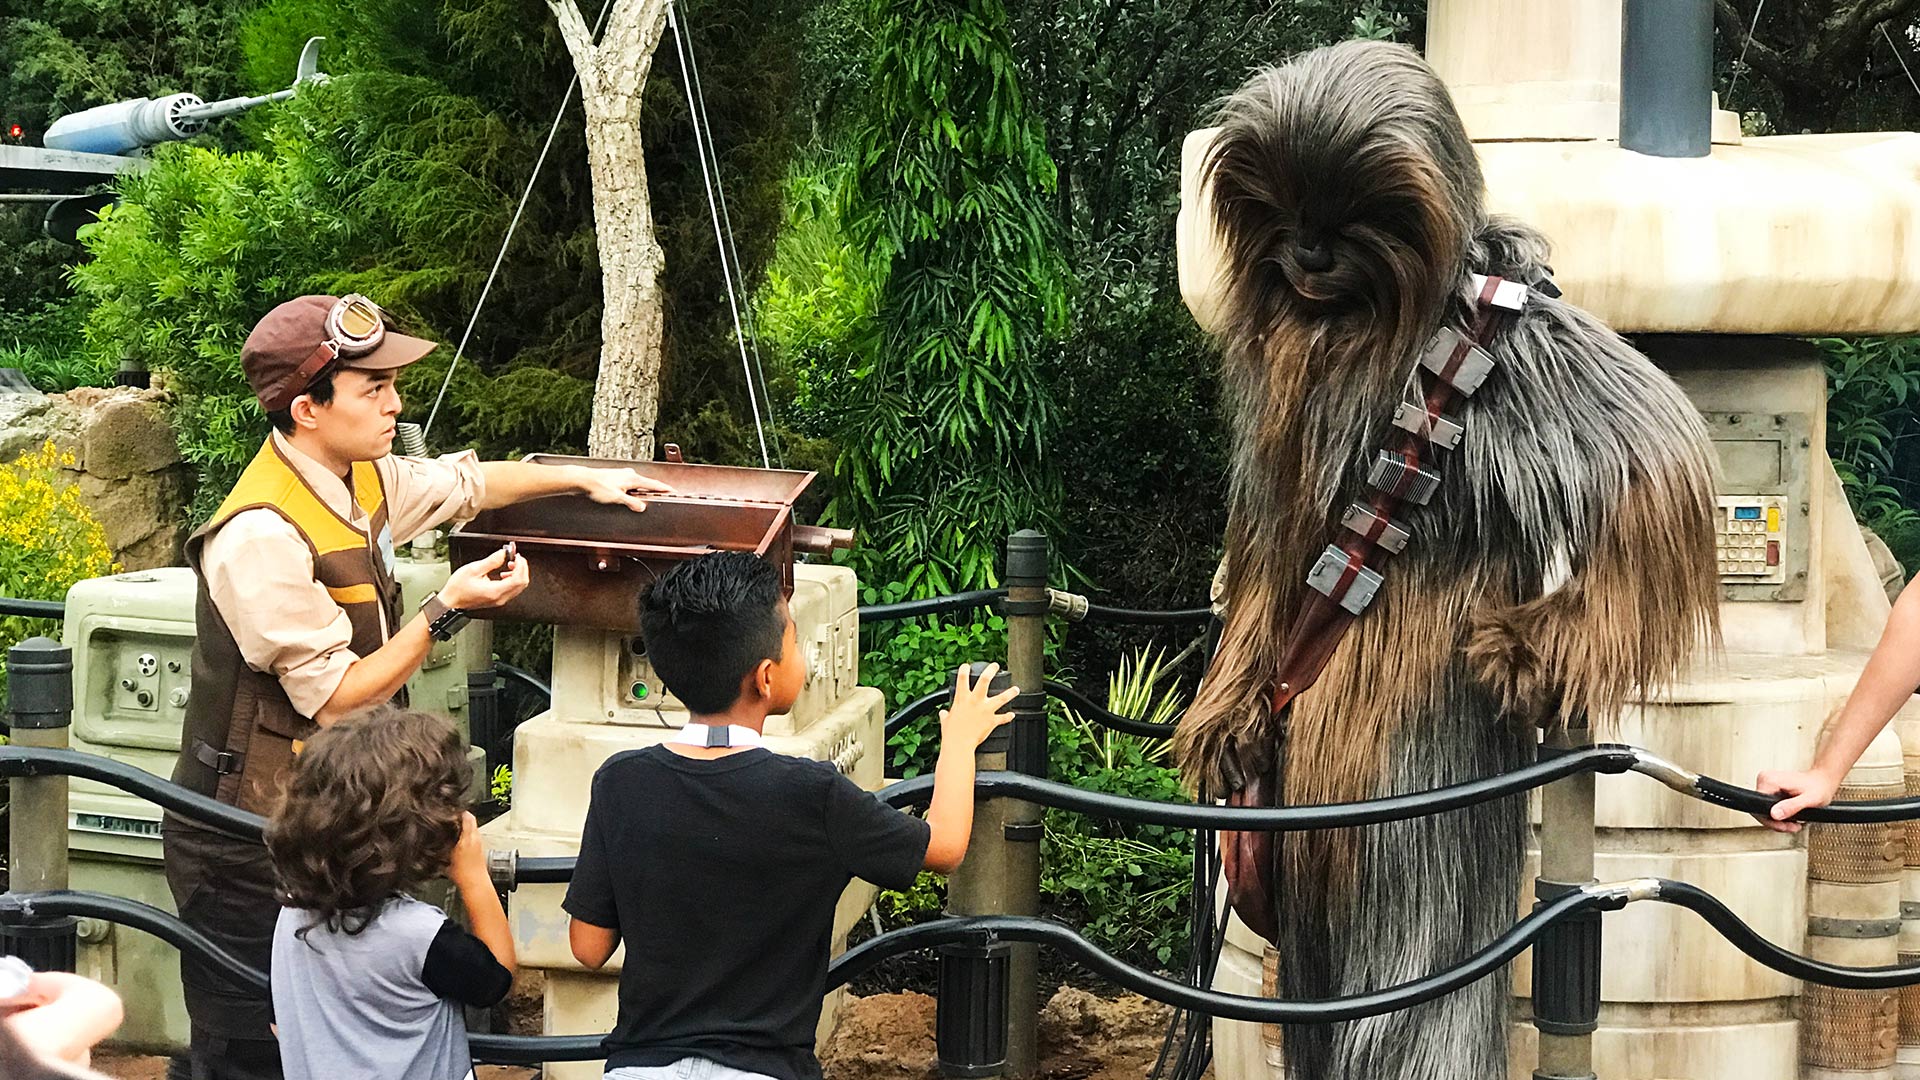 Chewbacca (right) with hand on his hip as he looks down at two children (boys, bottom left of photo) speaking to him. Male cast member is looking at Chewbacca while next to the children (left) while holding something in his right hand. Daytime shot. Land of Batuu. Star Wars: Galaxy's Edge at Disney's Hollywood Studios®. Lake Buena Vista, Florida.